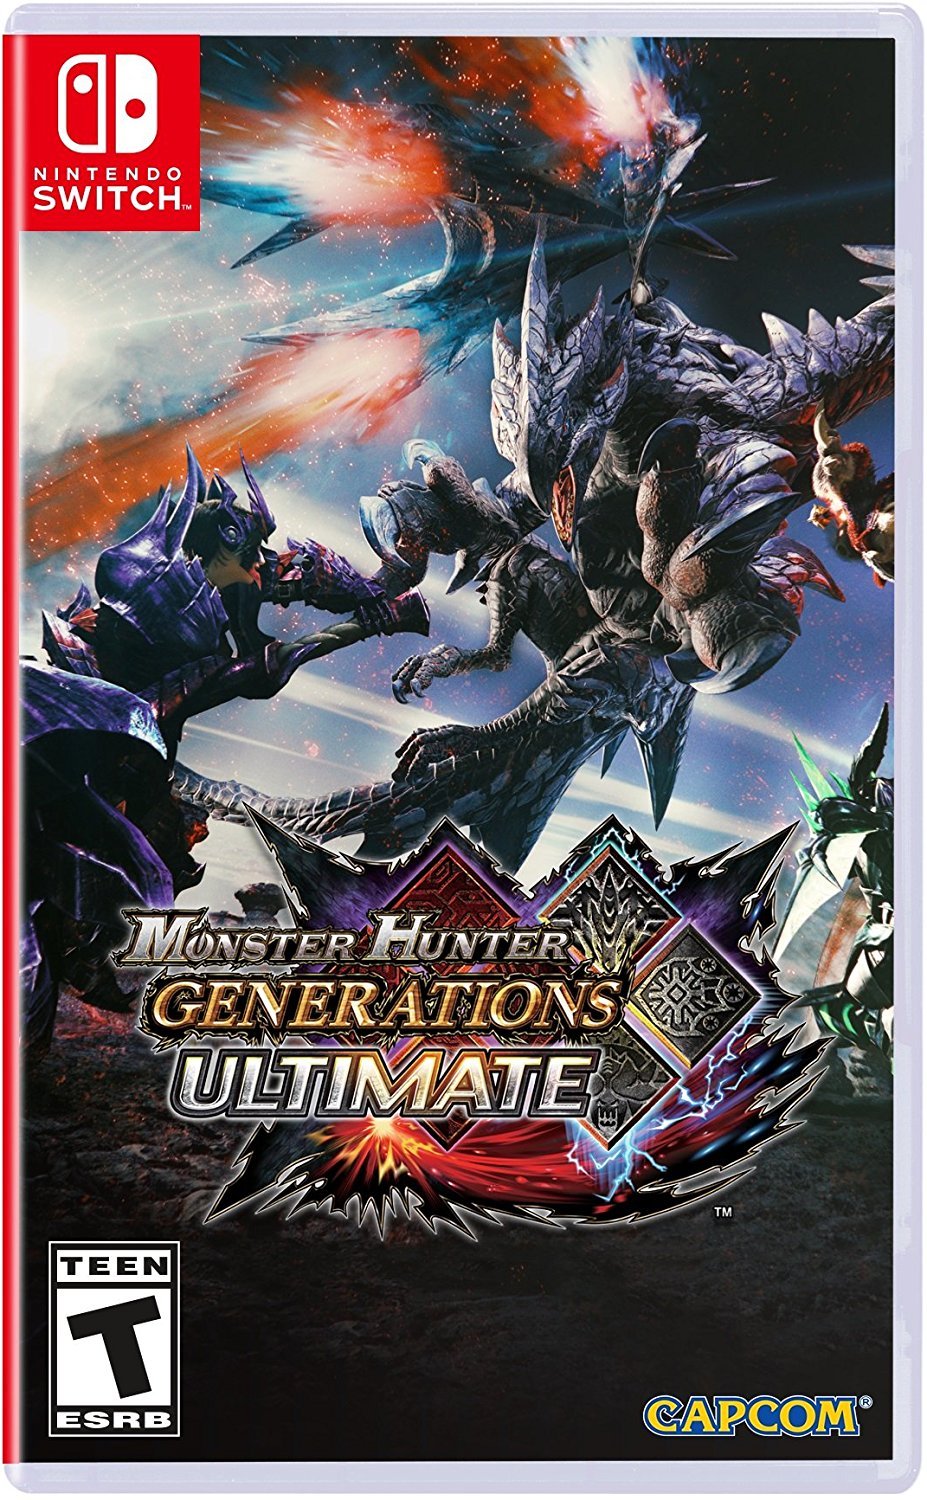 [Switch Save Progression] - Monster Hunter Generations Ultimate / XX Custom Mods Akirac Other Mods Seasonal and Non Seasonal Save Mod - Modded Items and Gear - Hacks - Cheats - Trainers for Playstation 4 - Playstation 5 - Nintendo Switch - Xbox One